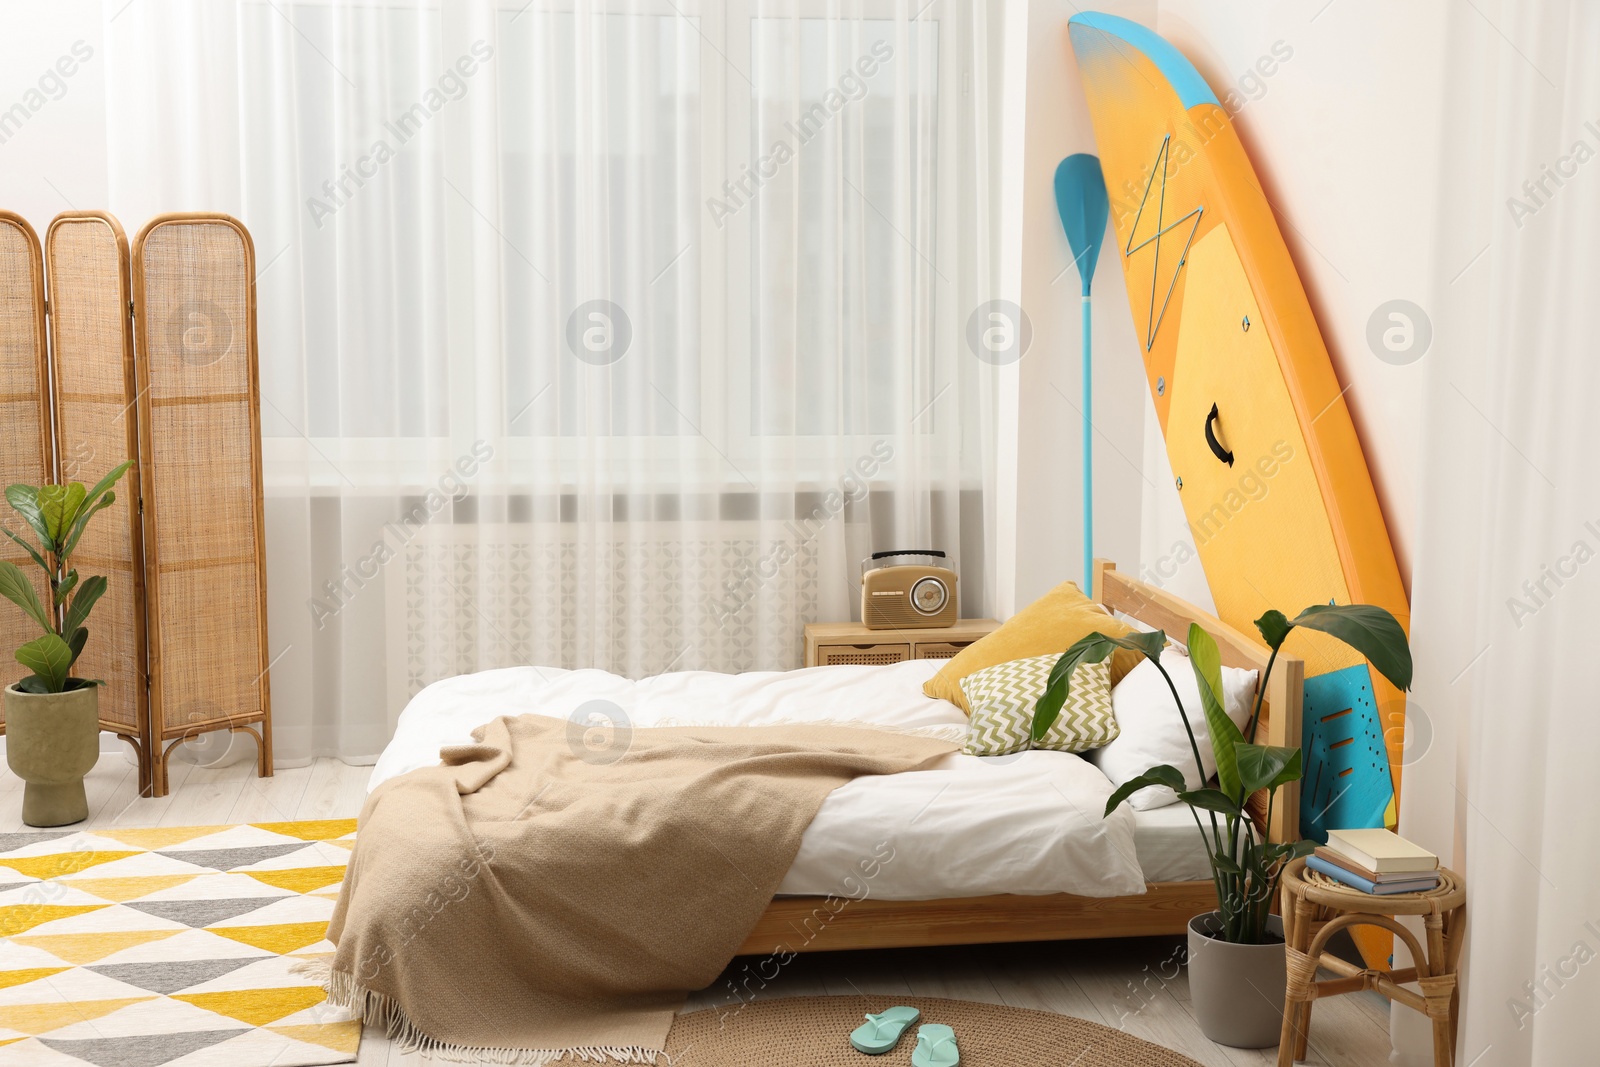 Photo of Large comfortable bed, SUP board and green houseplants in stylish bedroom. Interior design